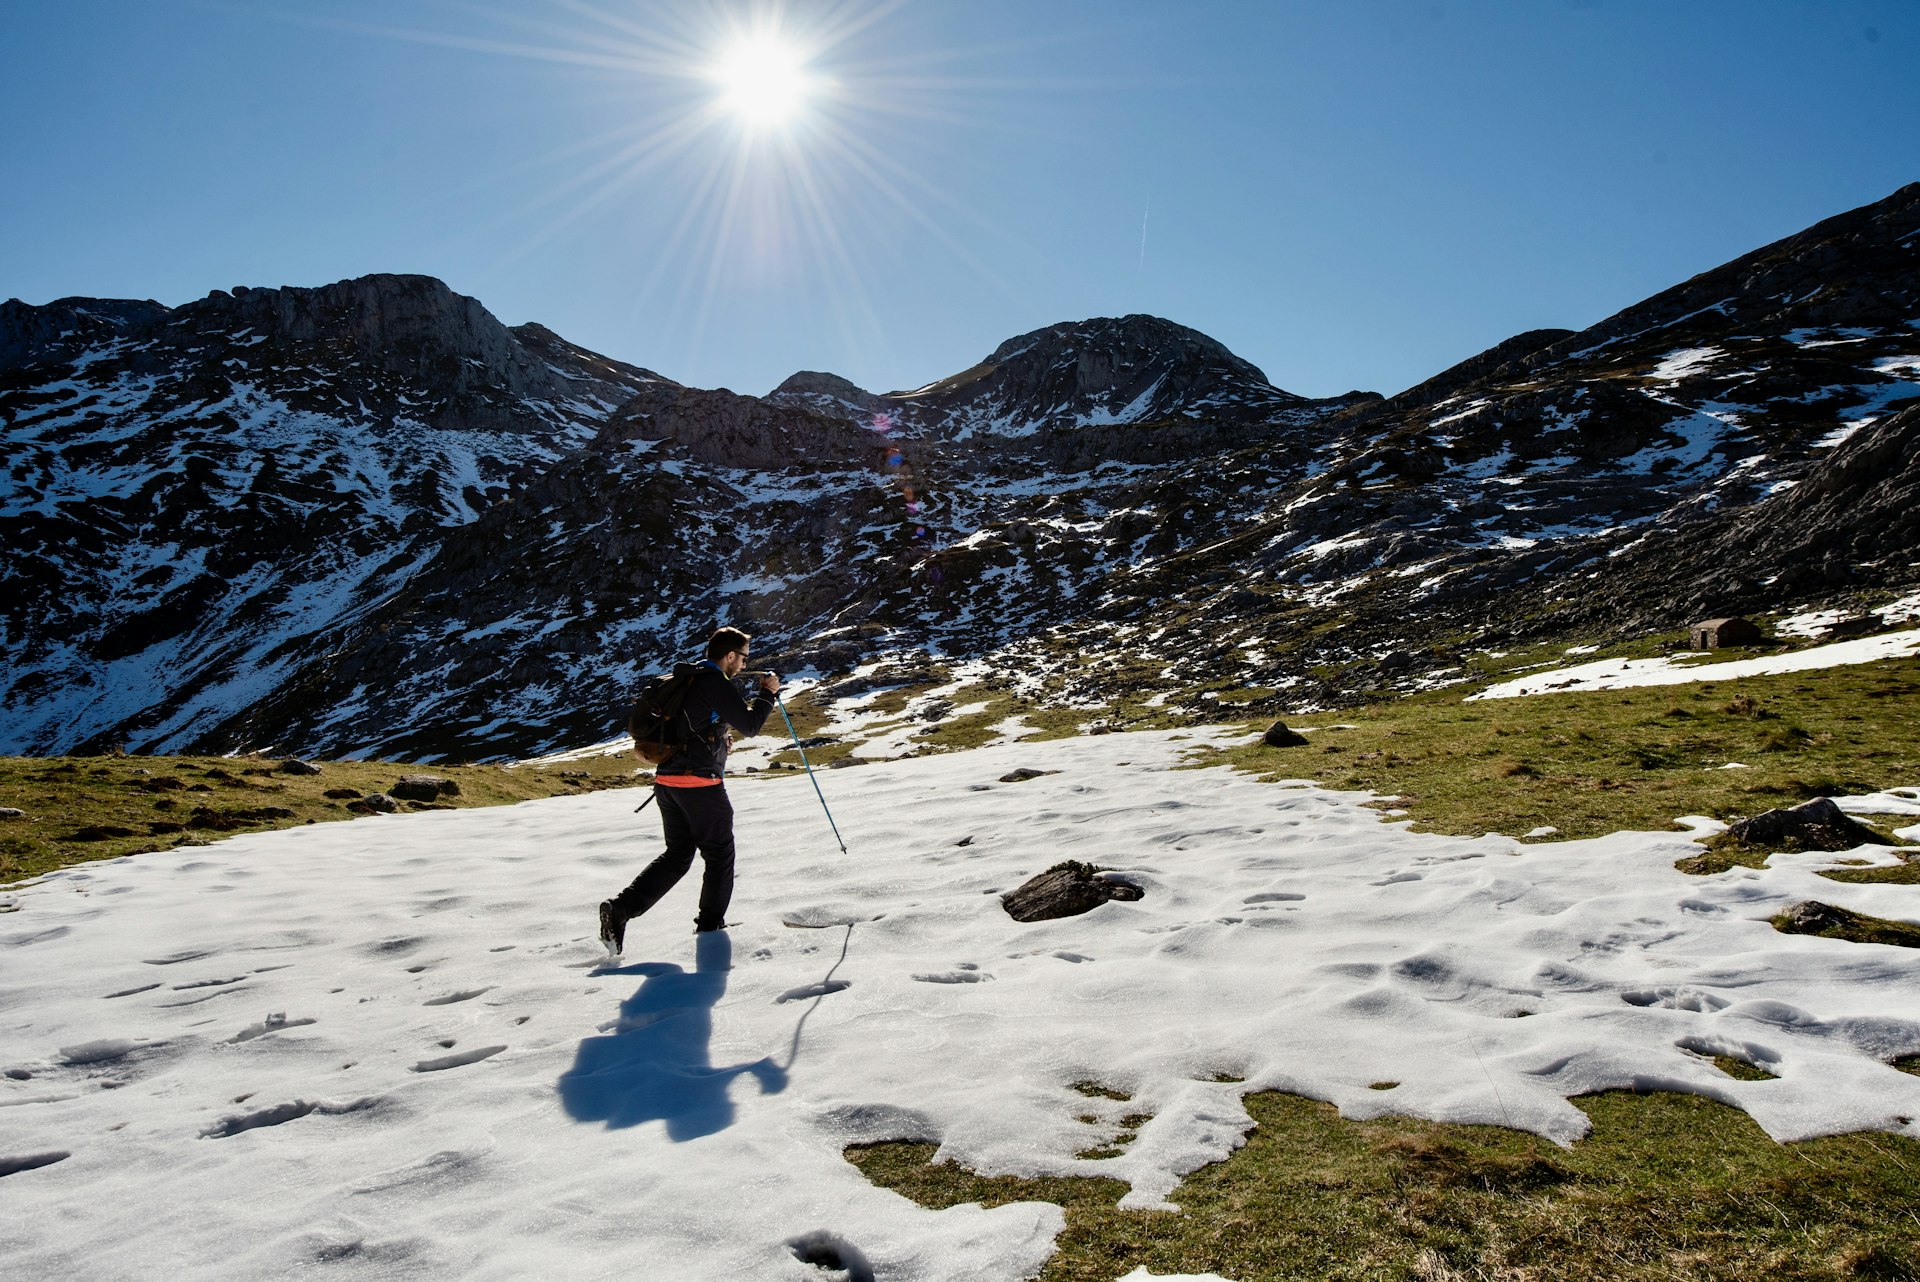 A hiker on a trail with residual snow in Parque Natural de Somiedo, Asturias, Spain